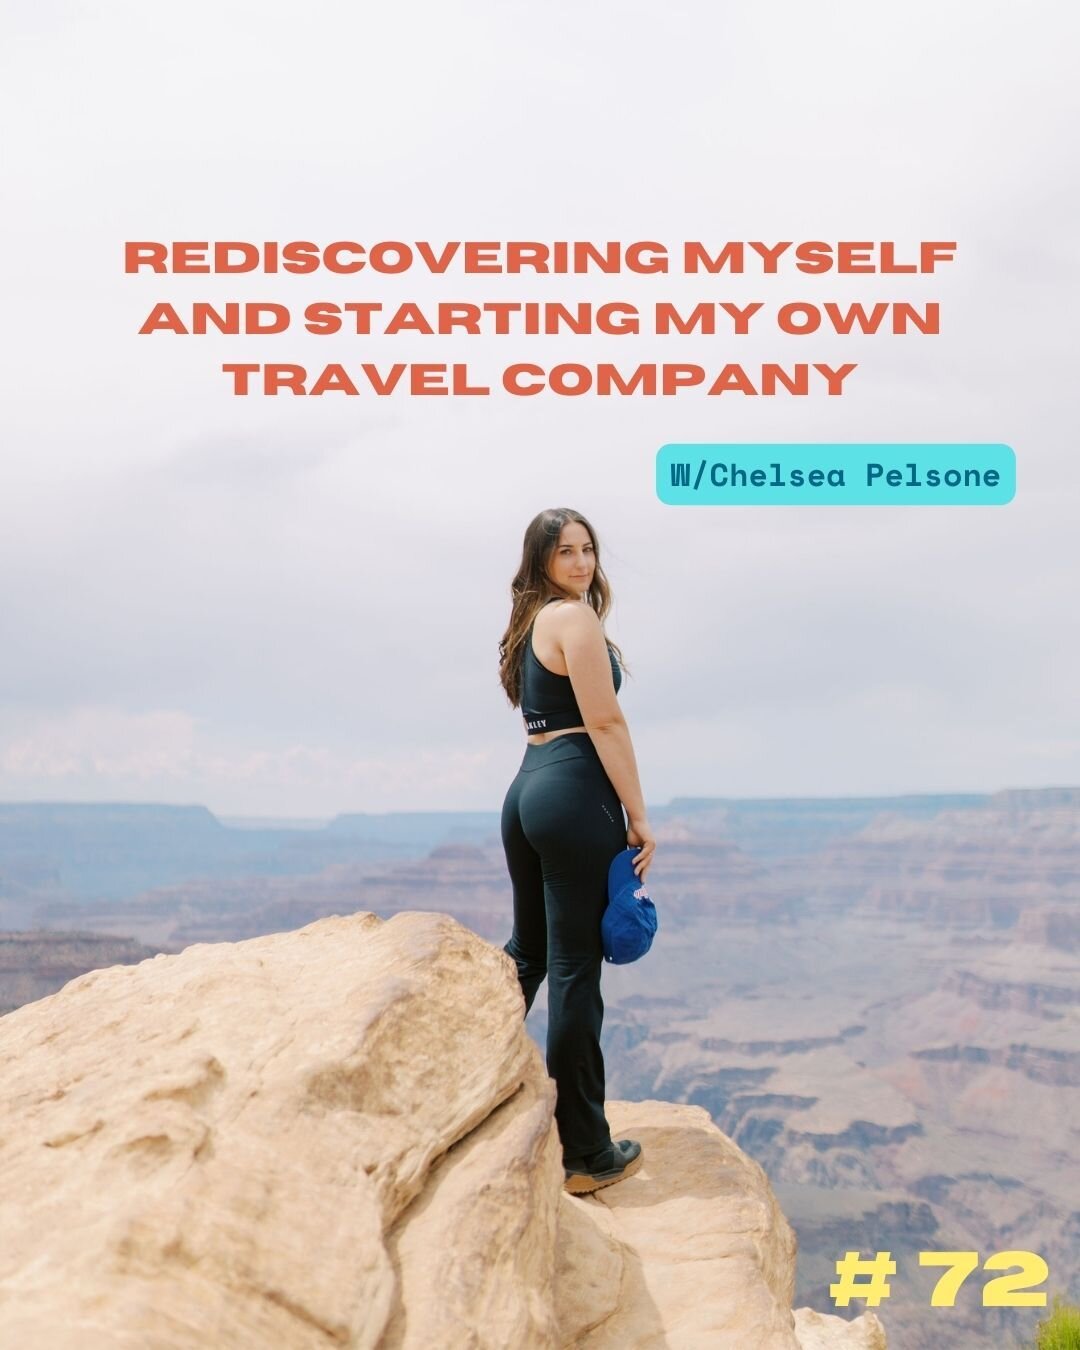 From heartache to triumph, Chels' story embodies the spirit of starting over and chasing dreams, including launching her own travel company. Chelsea Pelsone keeps it real and opens up about her life-changing experience and healing through the boundle